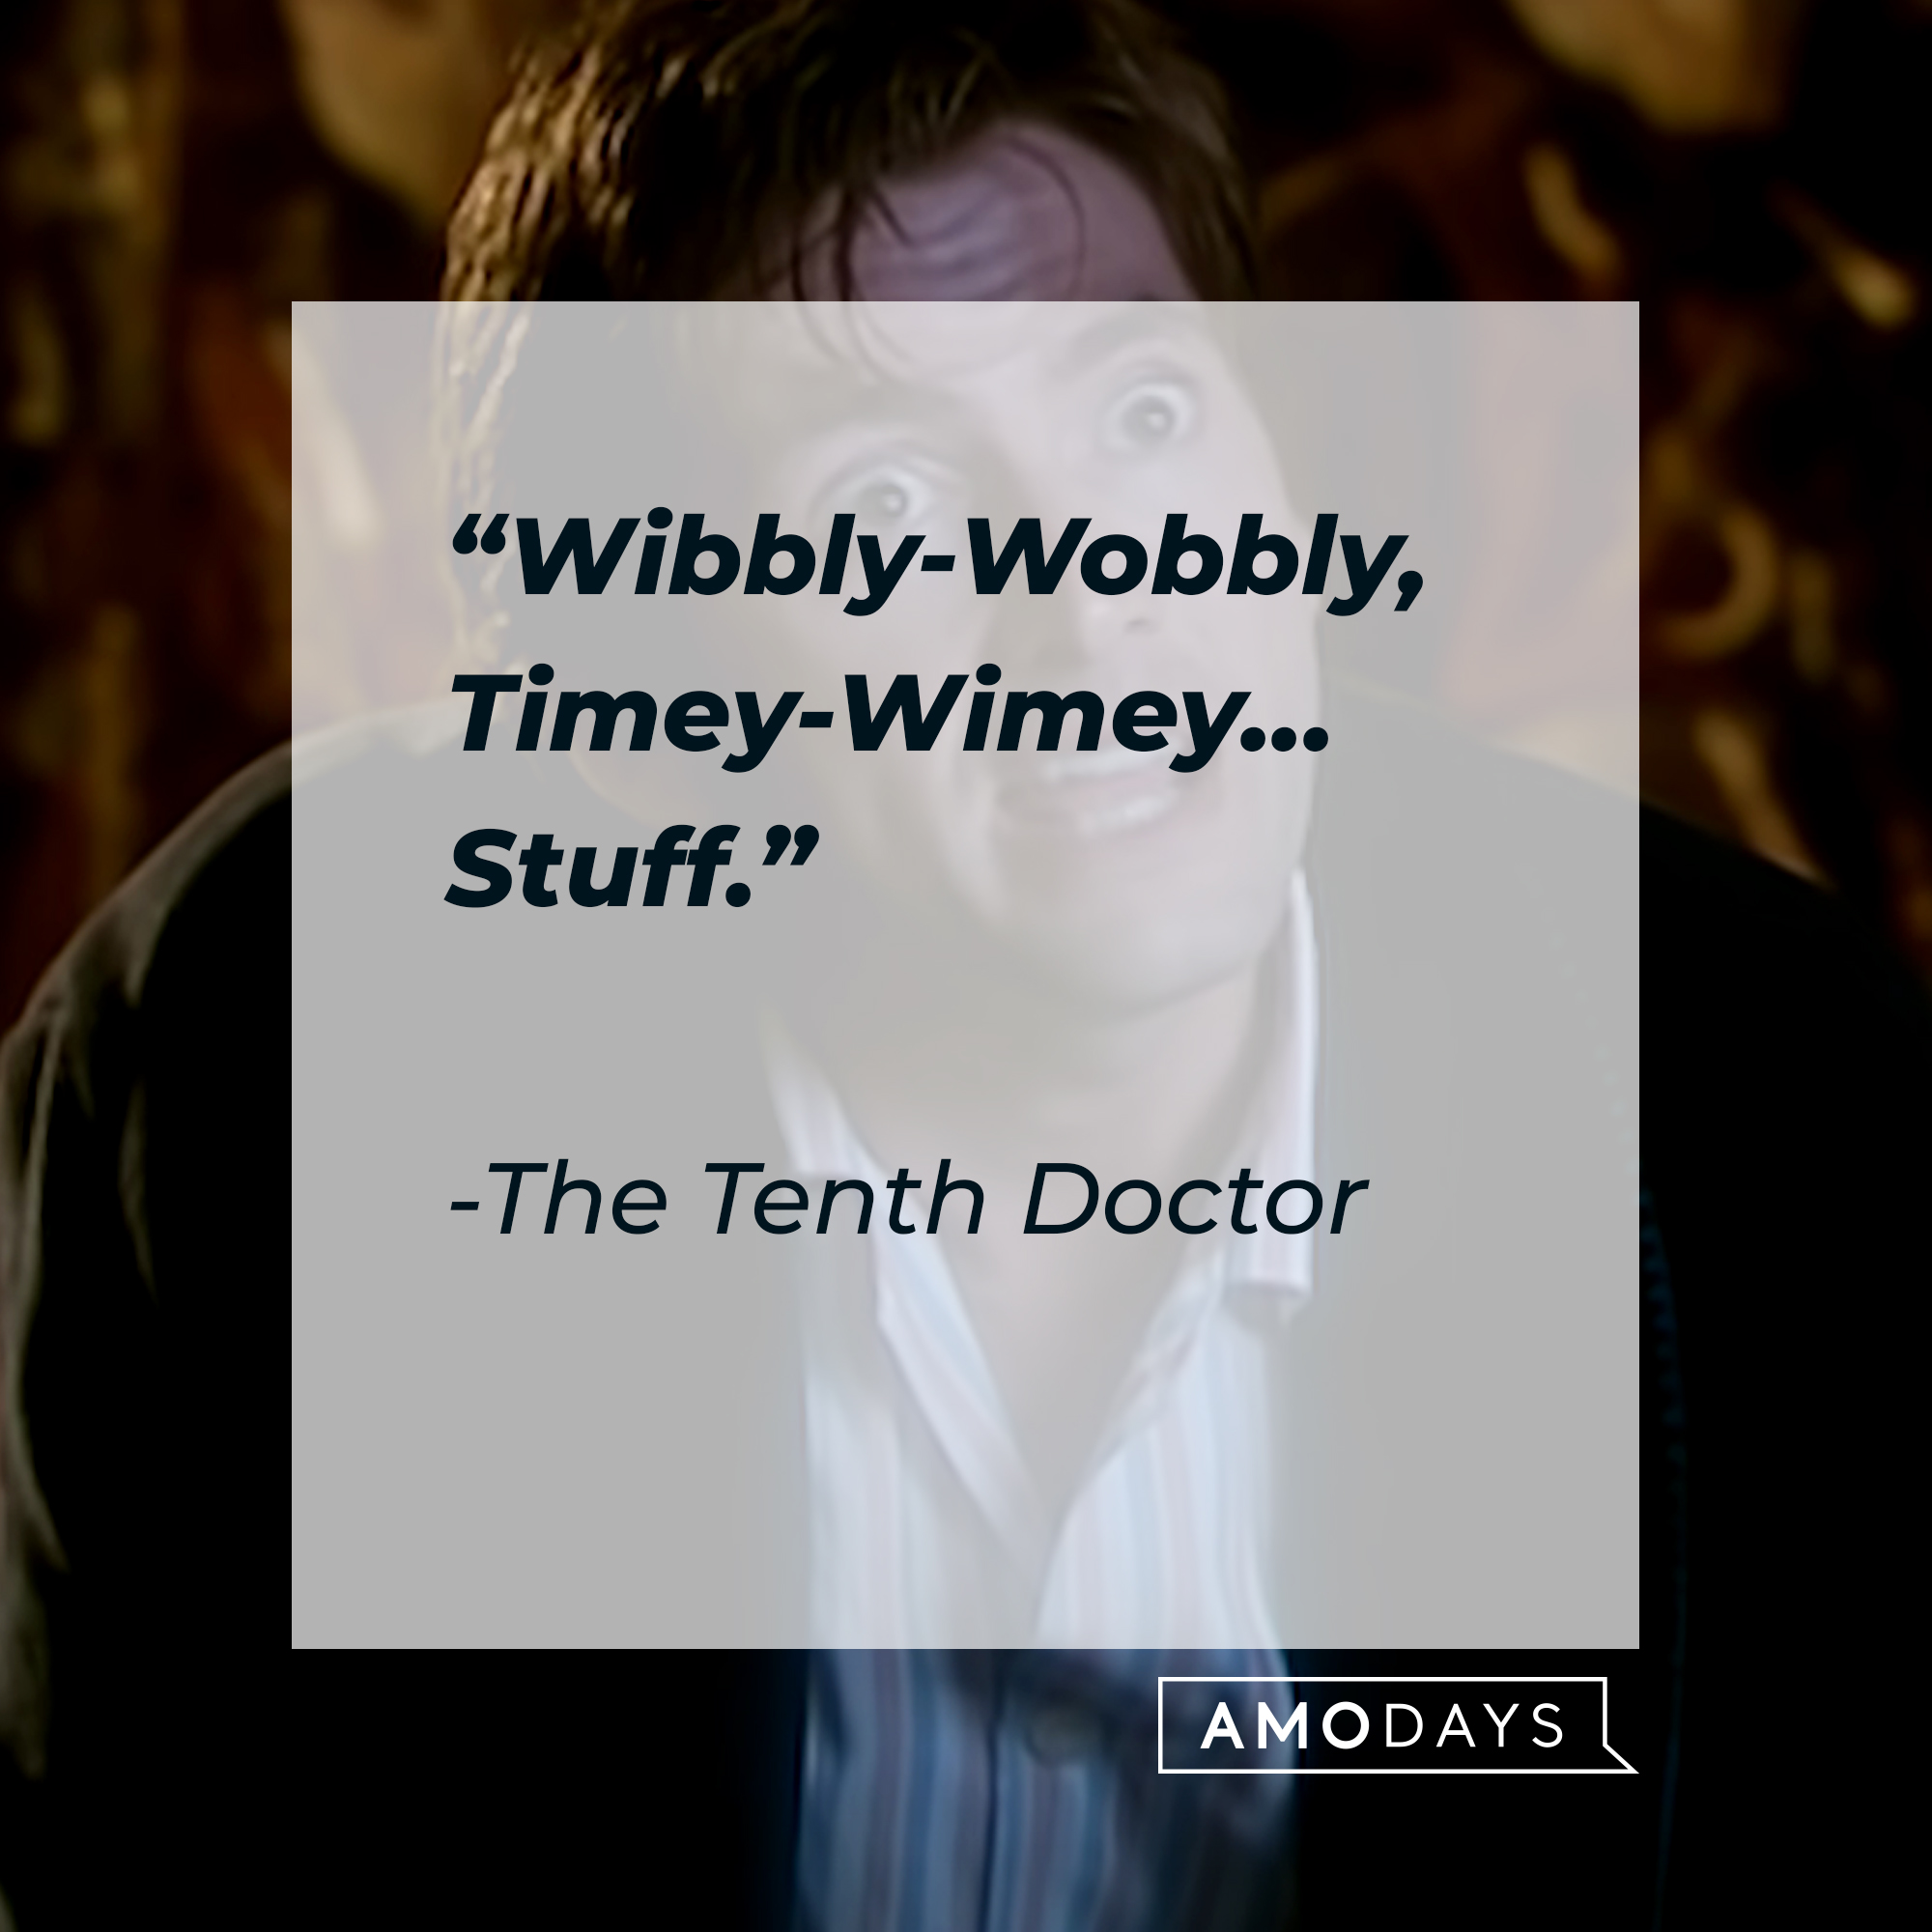 The Tenth Doctor's quote: "Wibbly-Wobbly, Timey-Wimey...Stuff." | Source: youtube.com/DoctorWho